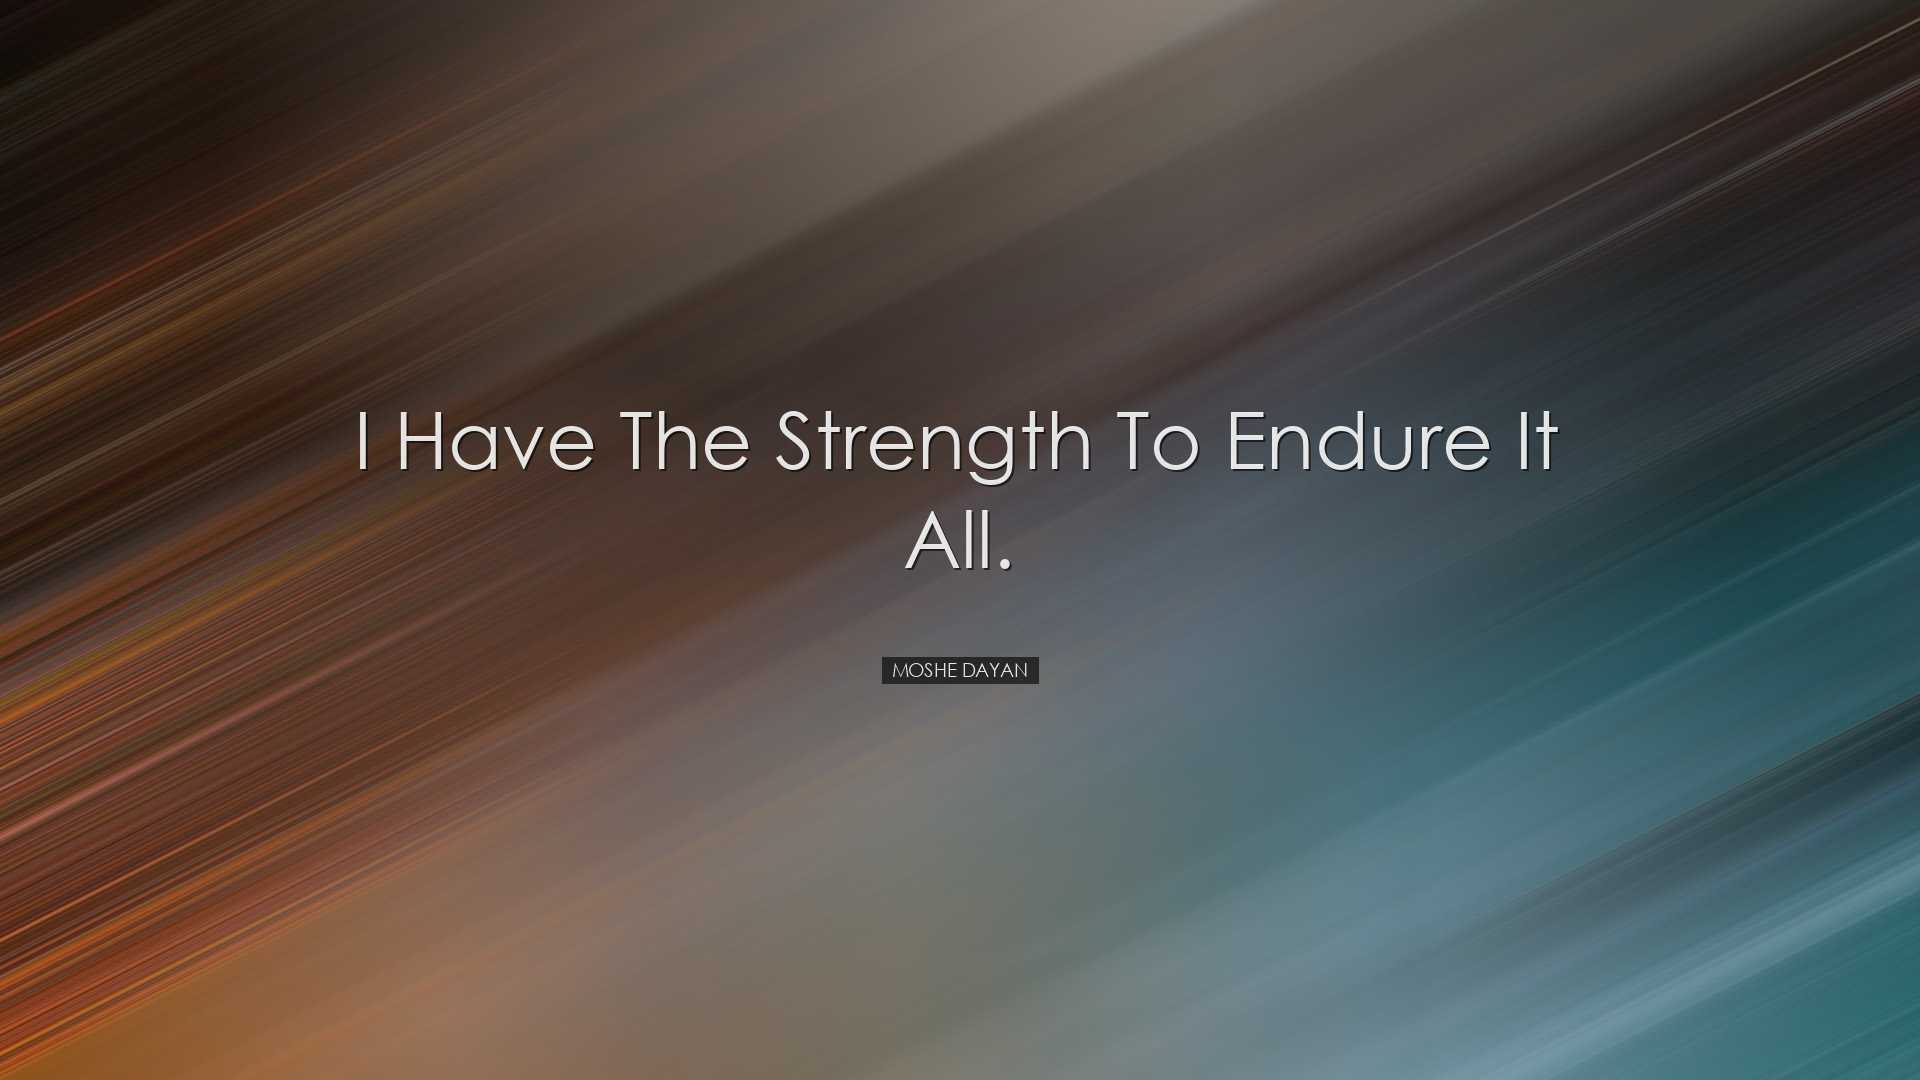 I have the strength to endure it all. - Moshe Dayan